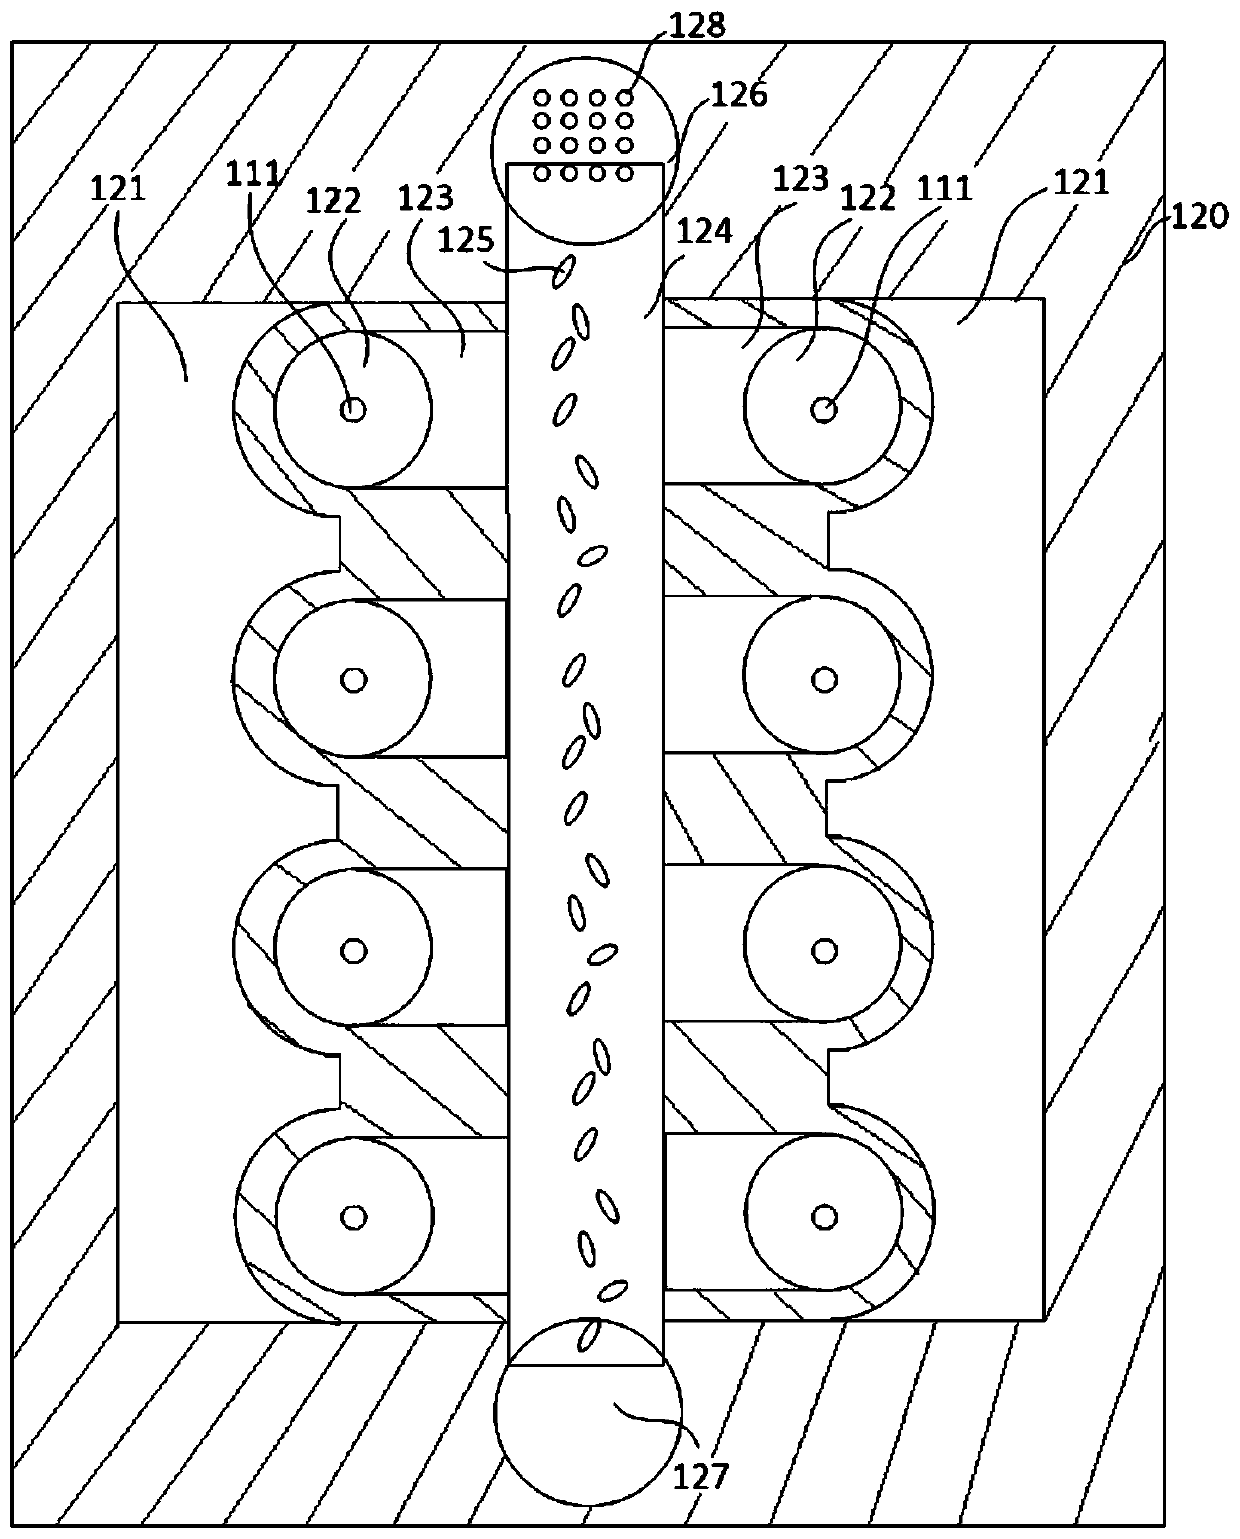 Biomolecule detection chips and detection system based on optical flow control